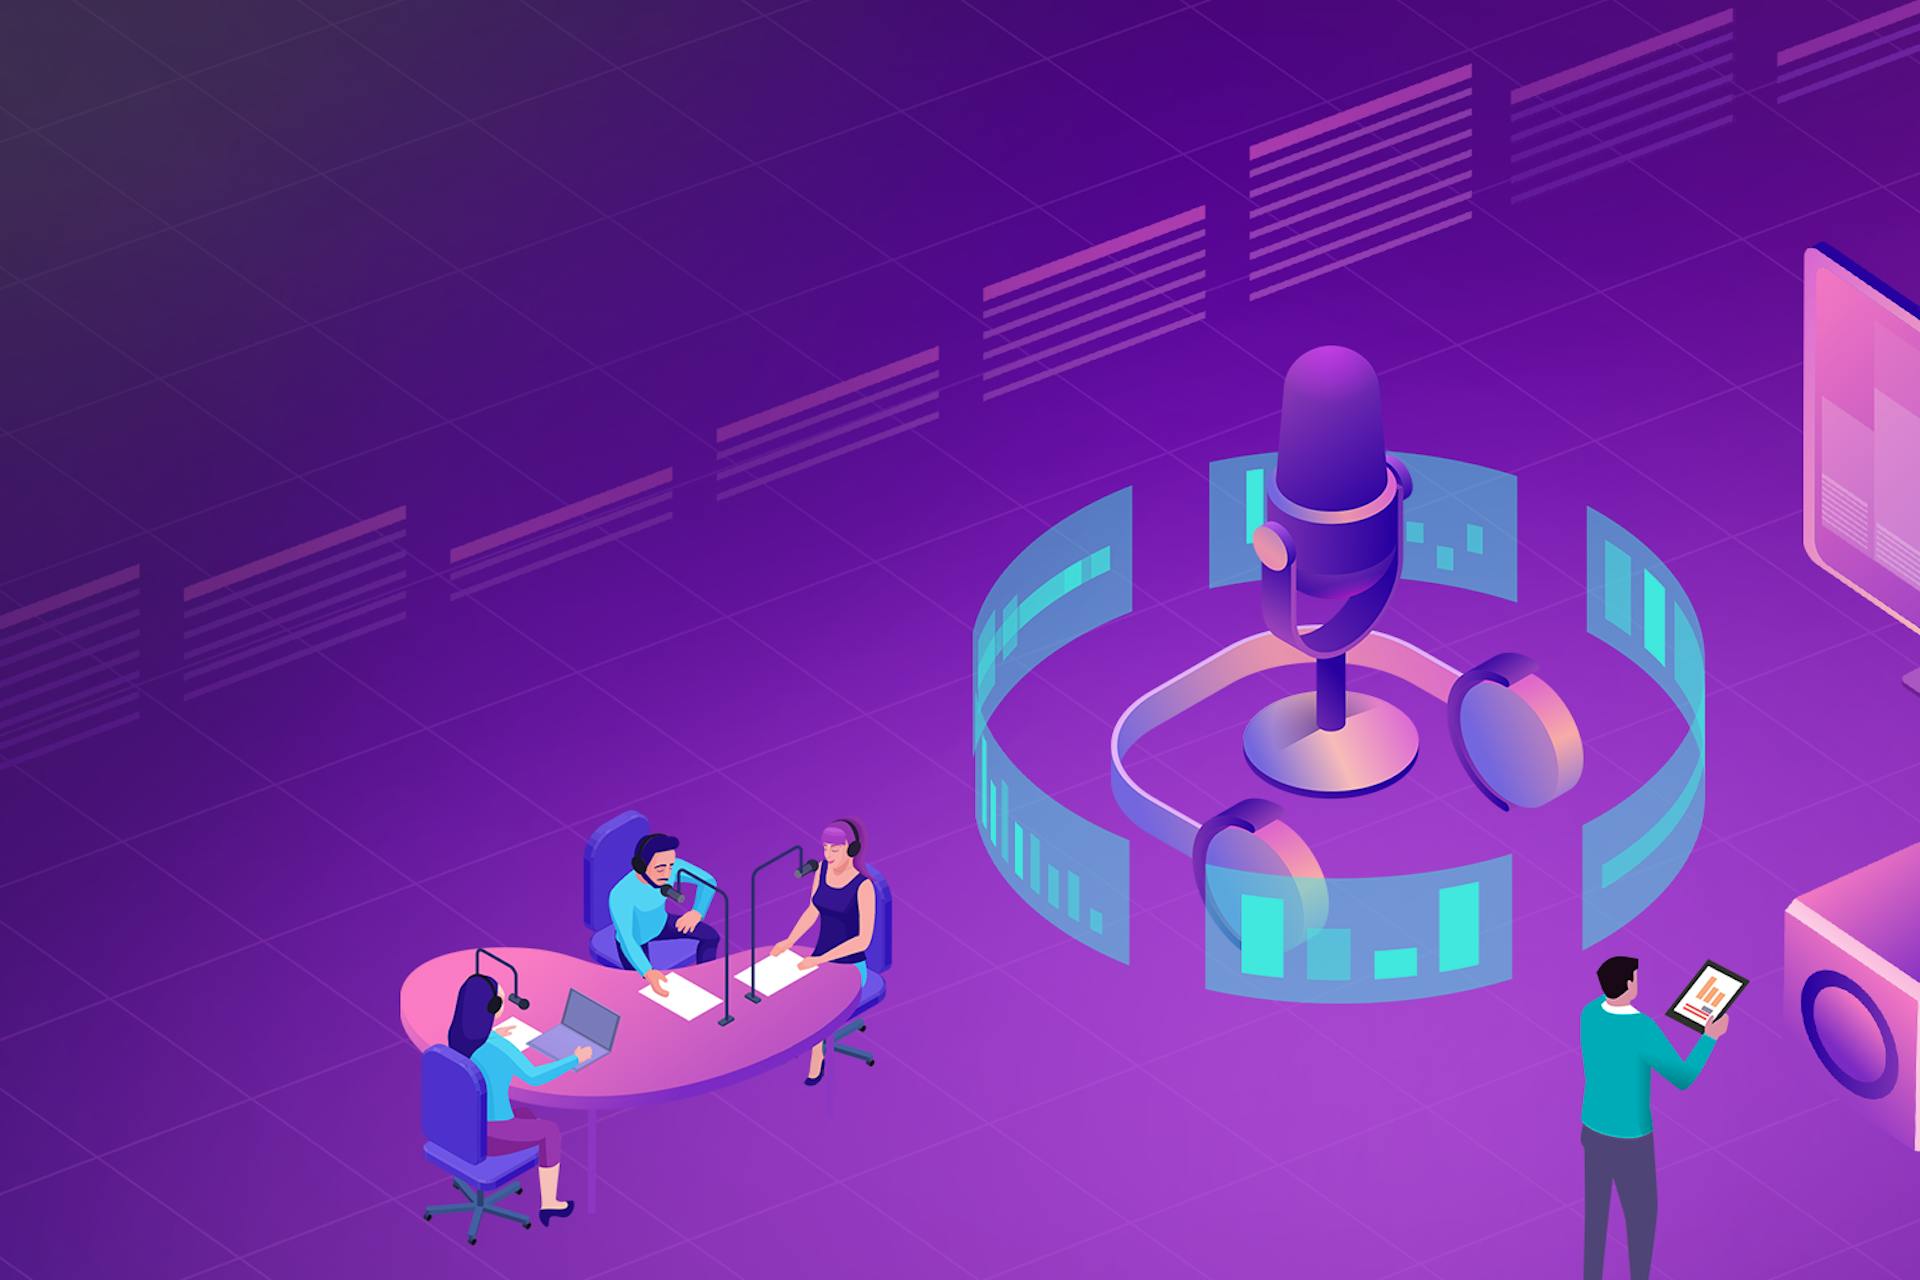 Illustration of a podcasting studio against a purple backdrop